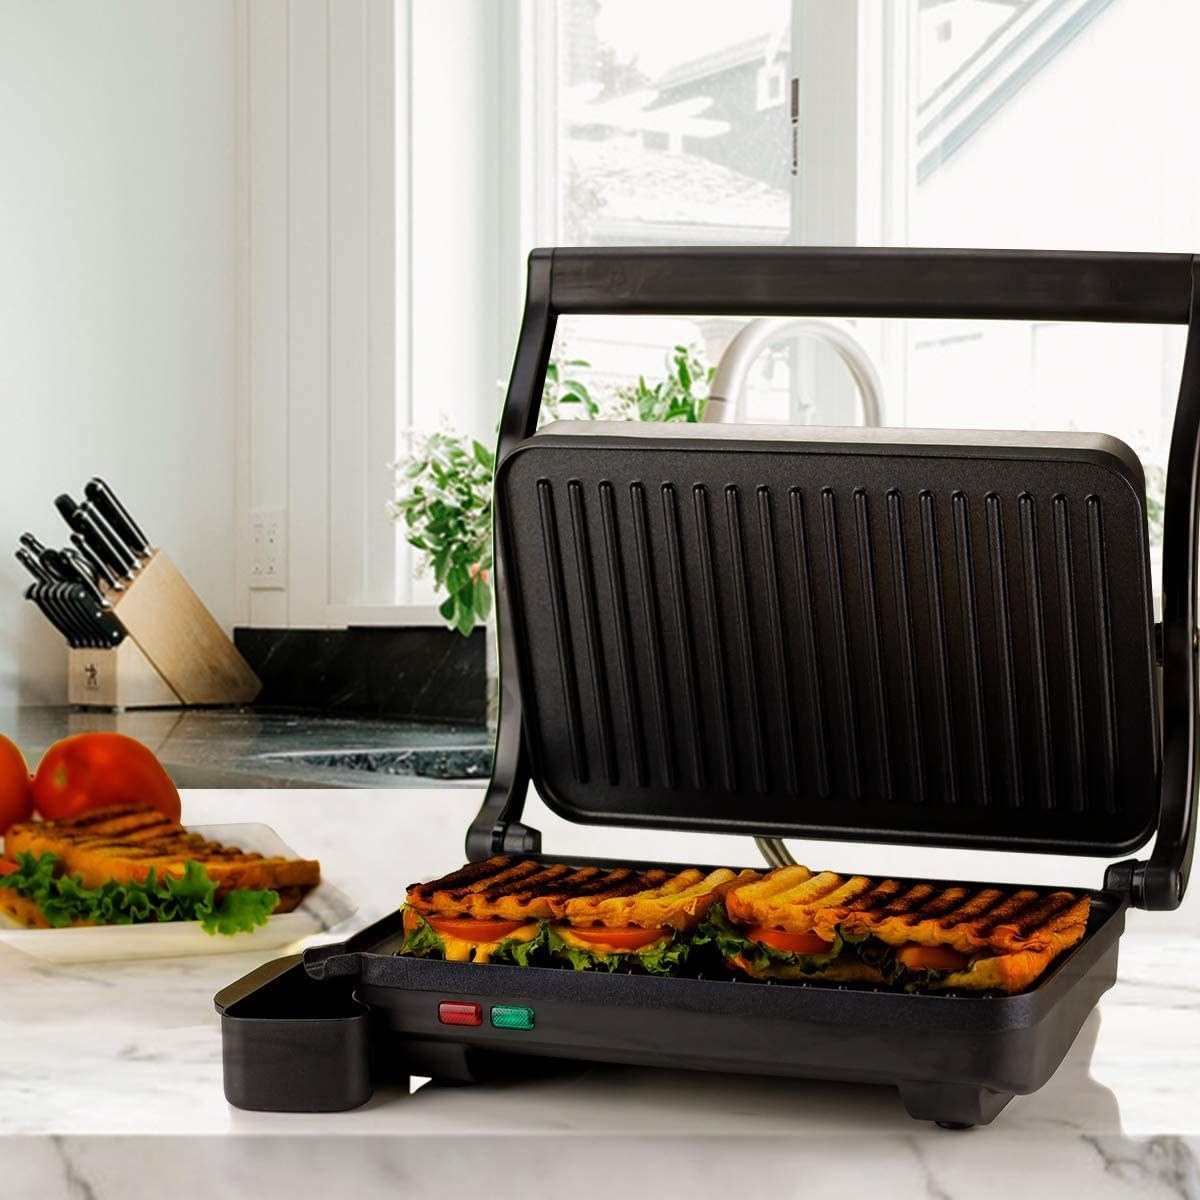 The panini press with a grilled sandwich inside